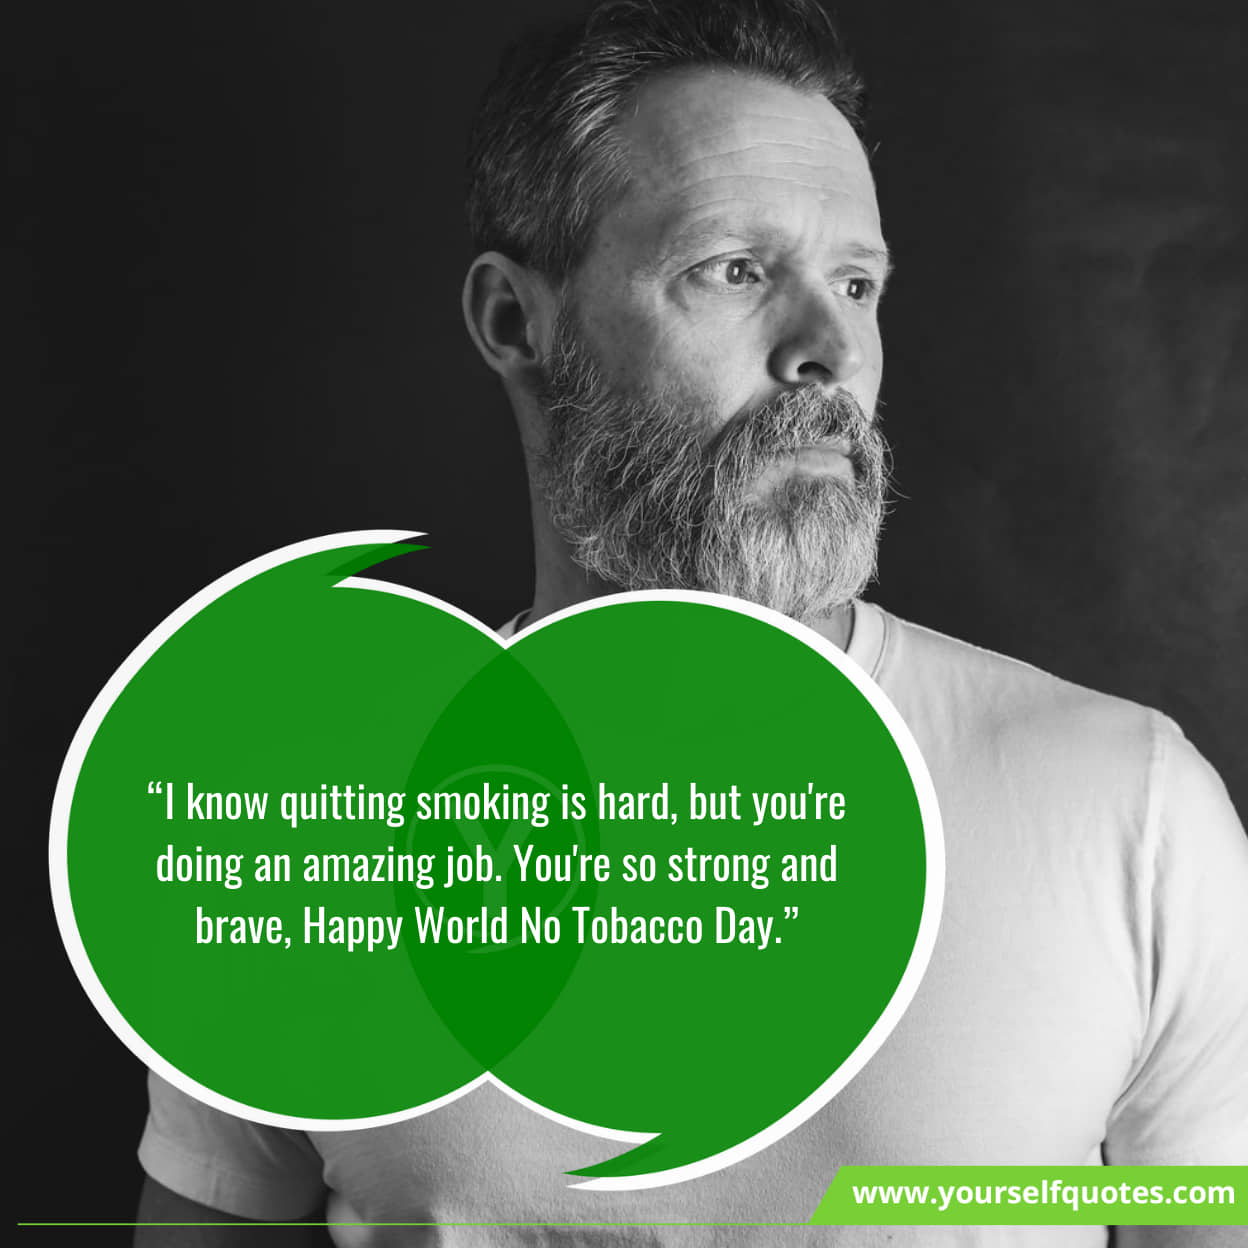 World No Tobacco Day Inspirational Messages